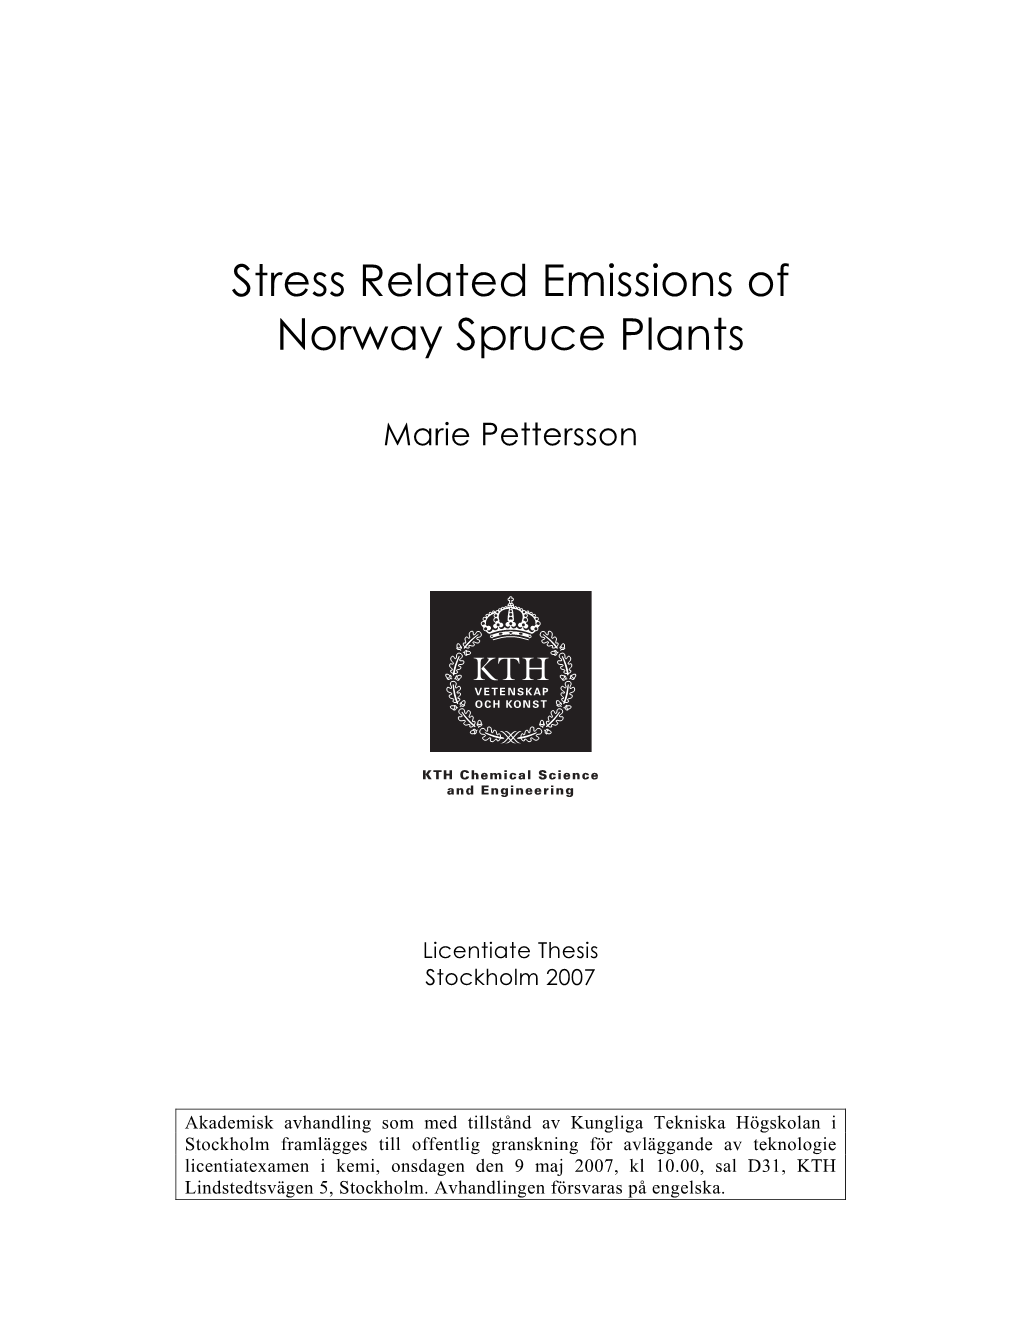 Stress Related Emissions of Norway Spruce Plants